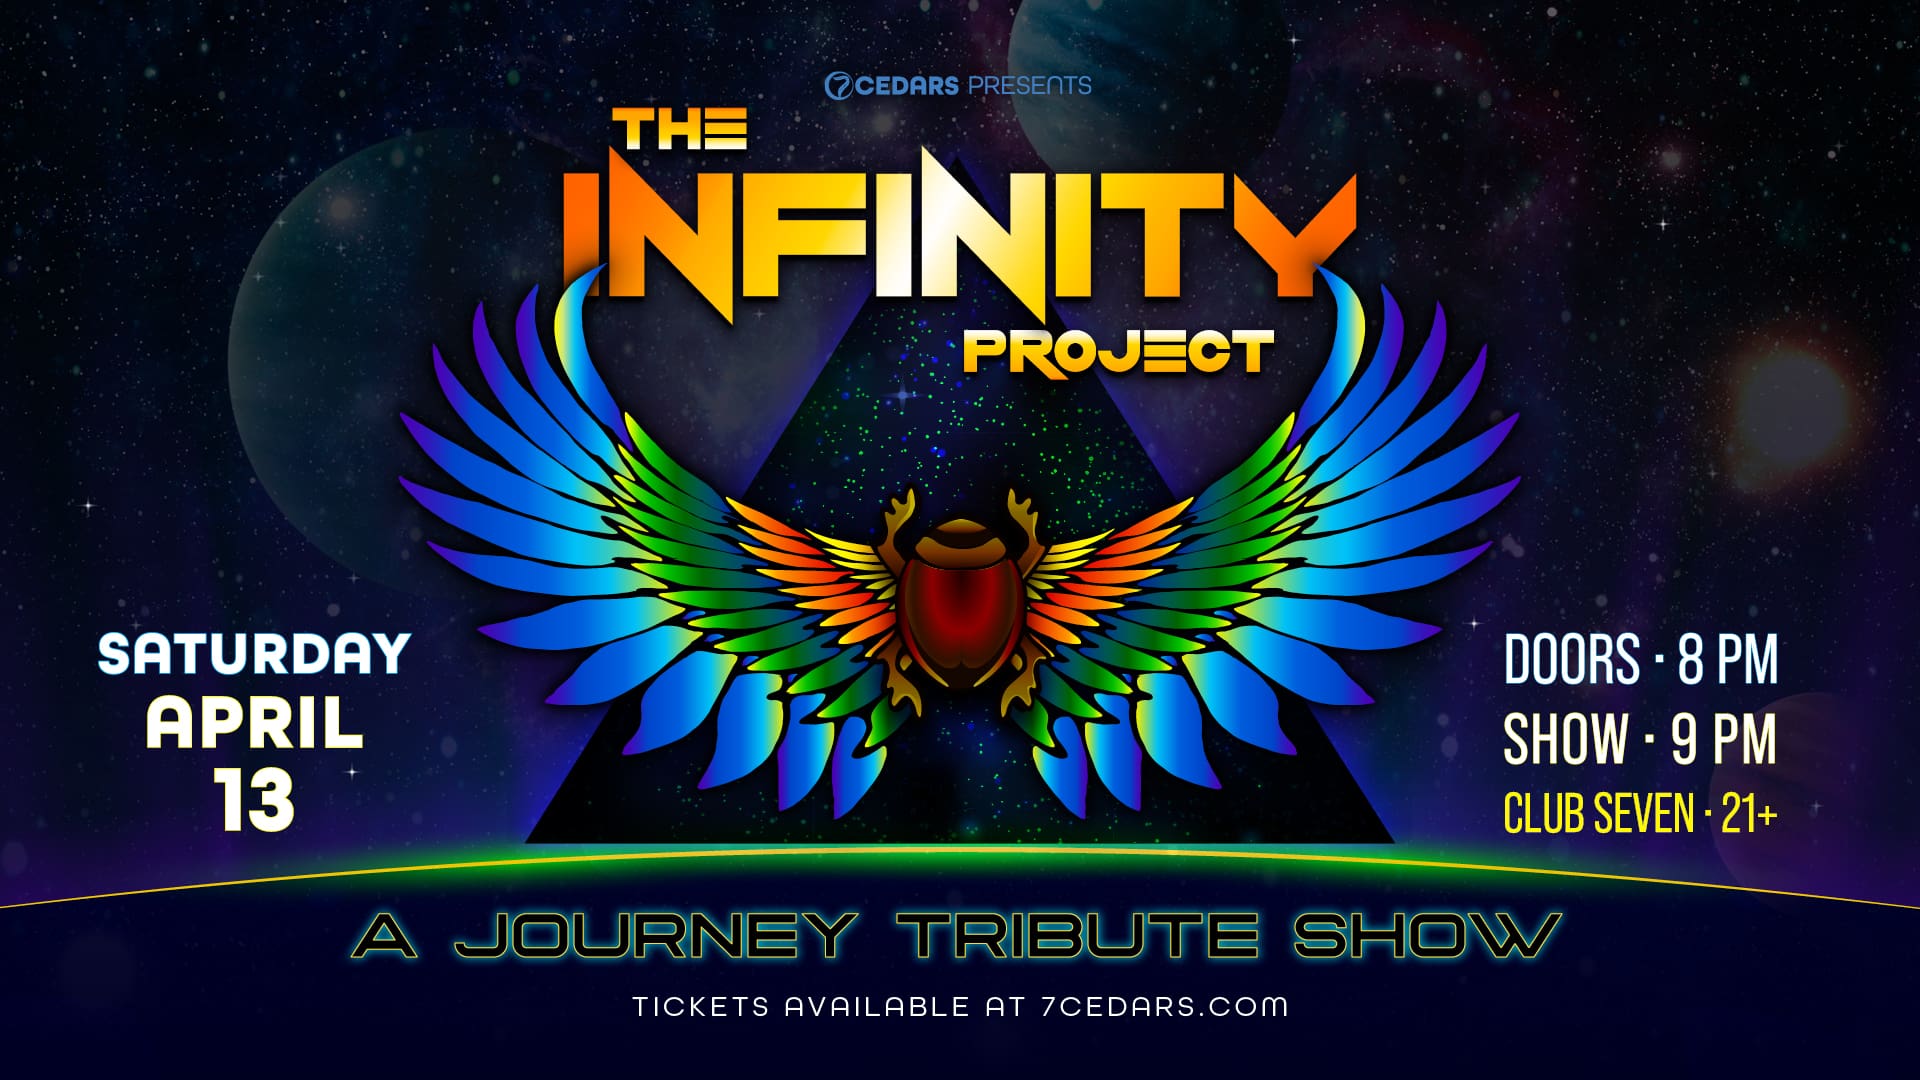 The Infinity Project: A Journey Tribute